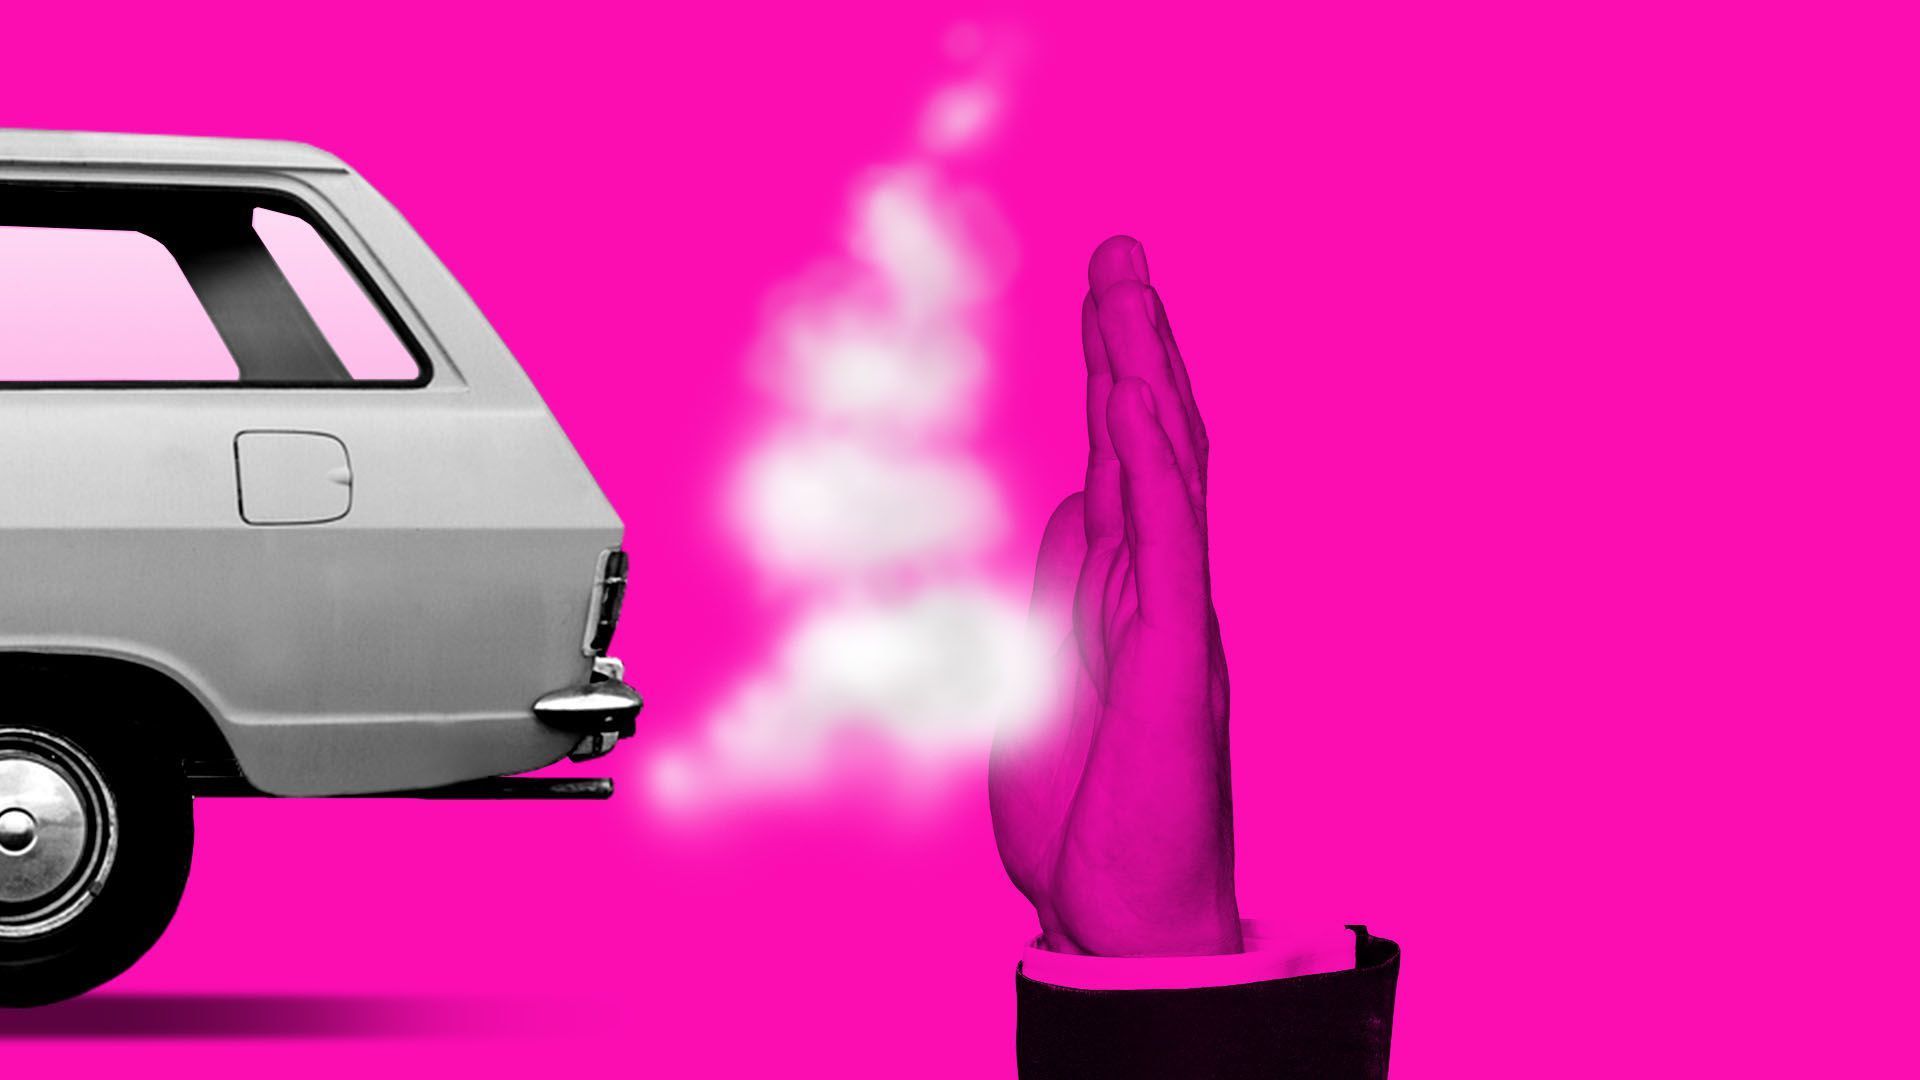 Illustration of a hand catching exhaust from a car